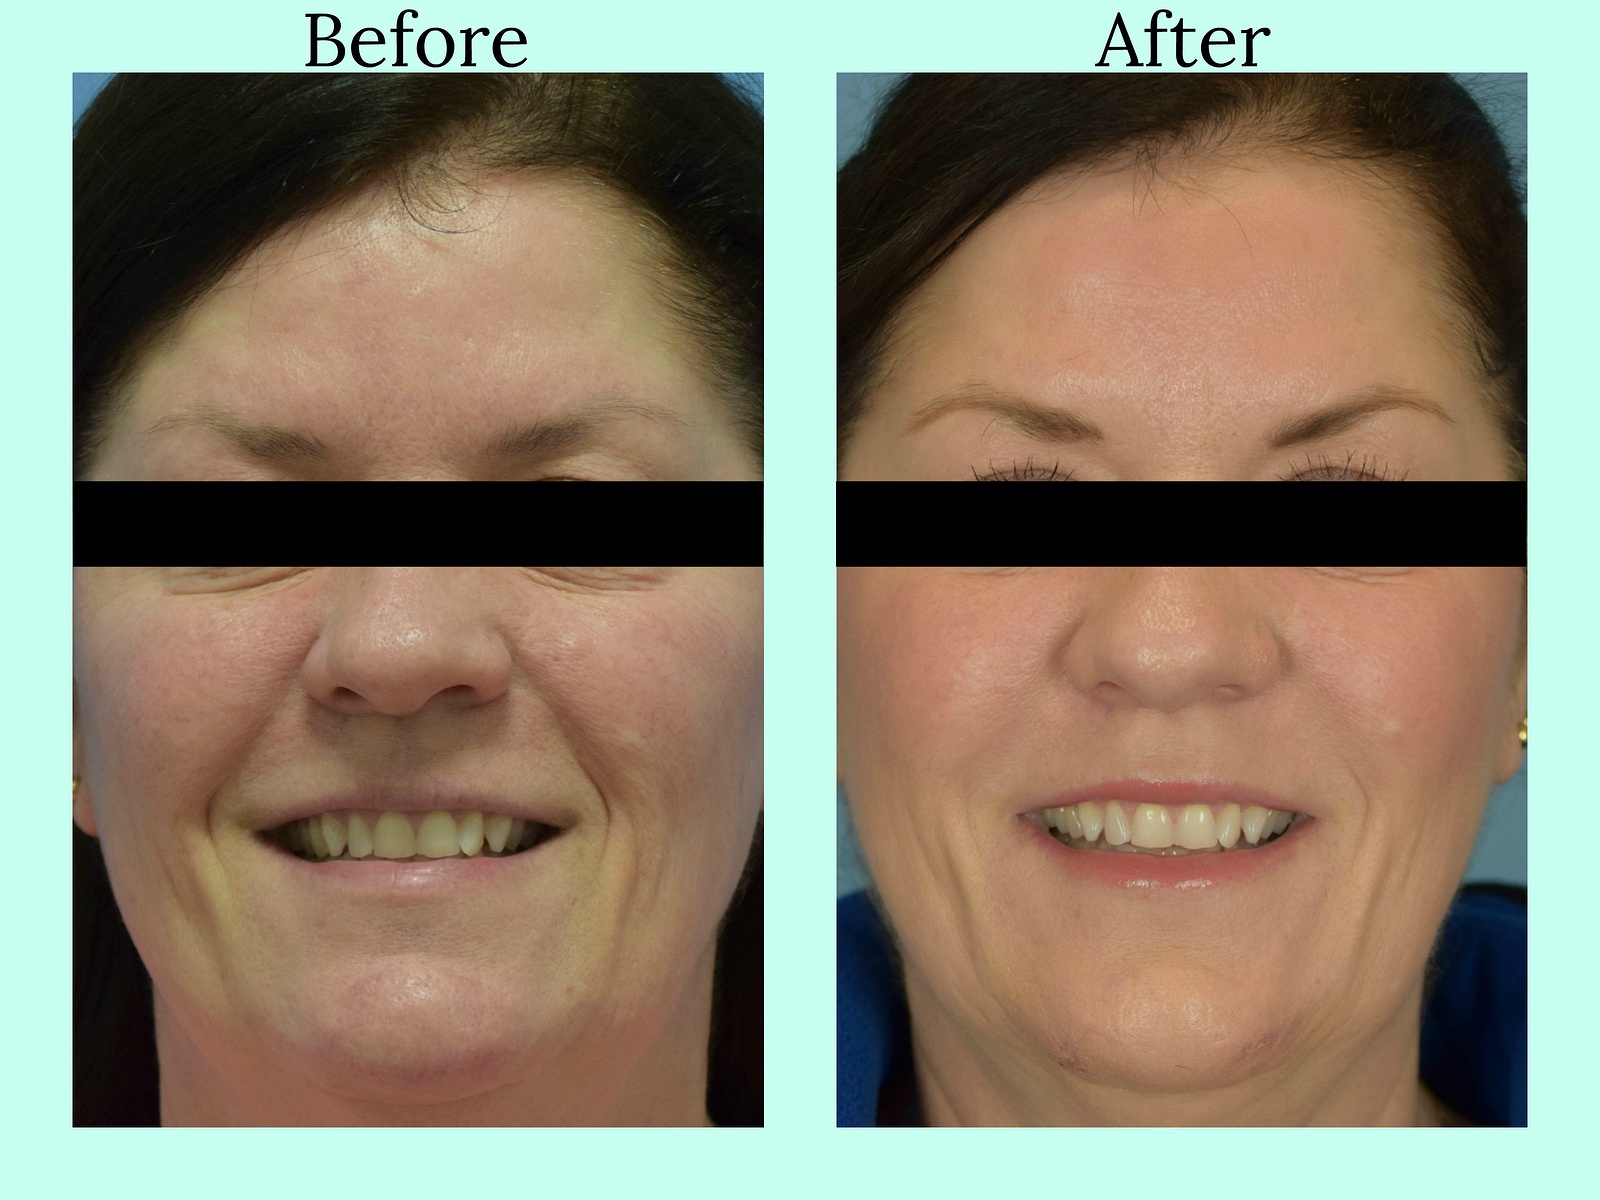 Woman's face, before and after Liquid Facelift treatment, front view